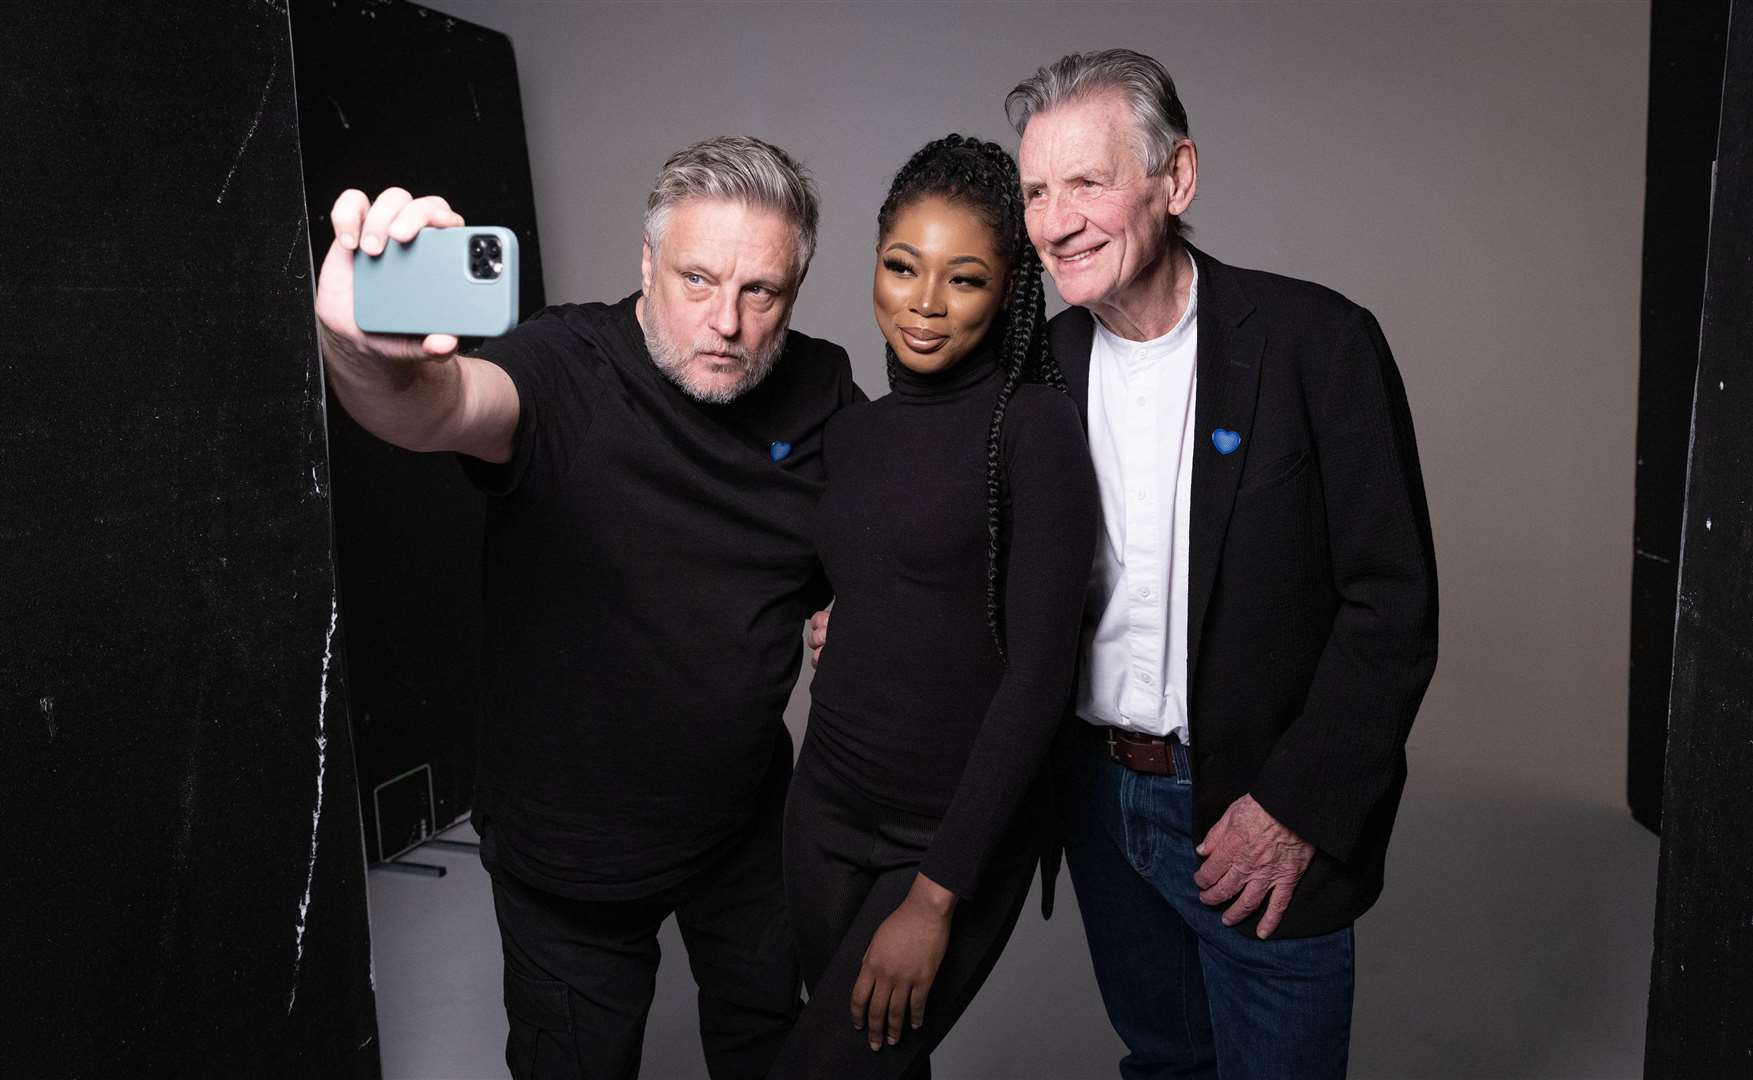 Nafisat Ibrahim (centre), 25, from London and Michael Palin (right) during a photoshoot with Rankin (left) as part of a new exhibition led by NHS Charities Together (Matt Alexander/PA)